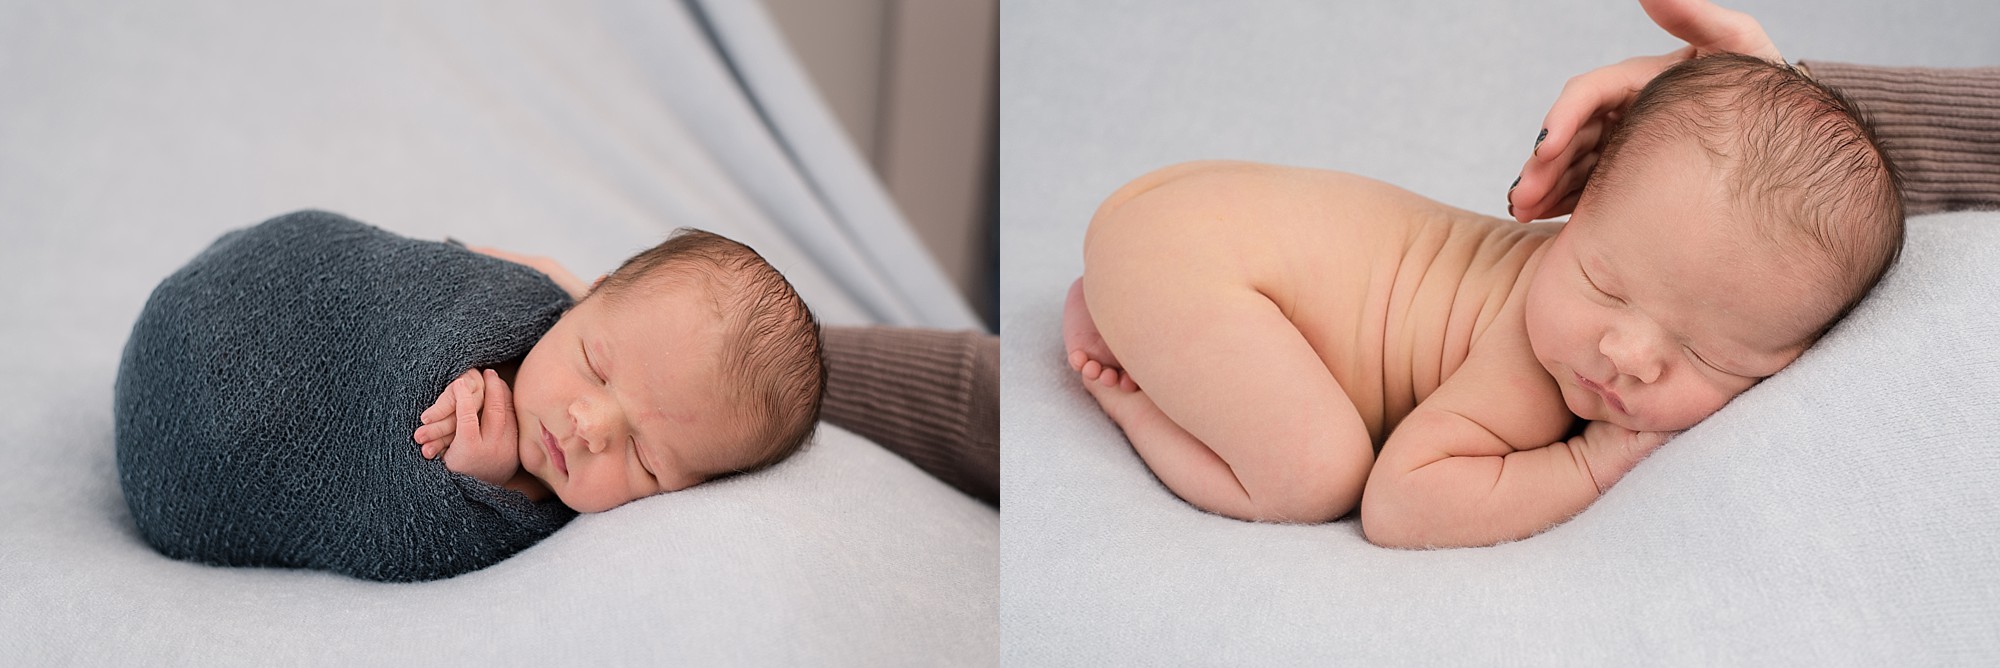 newborn baby during a photo shoot being spotted